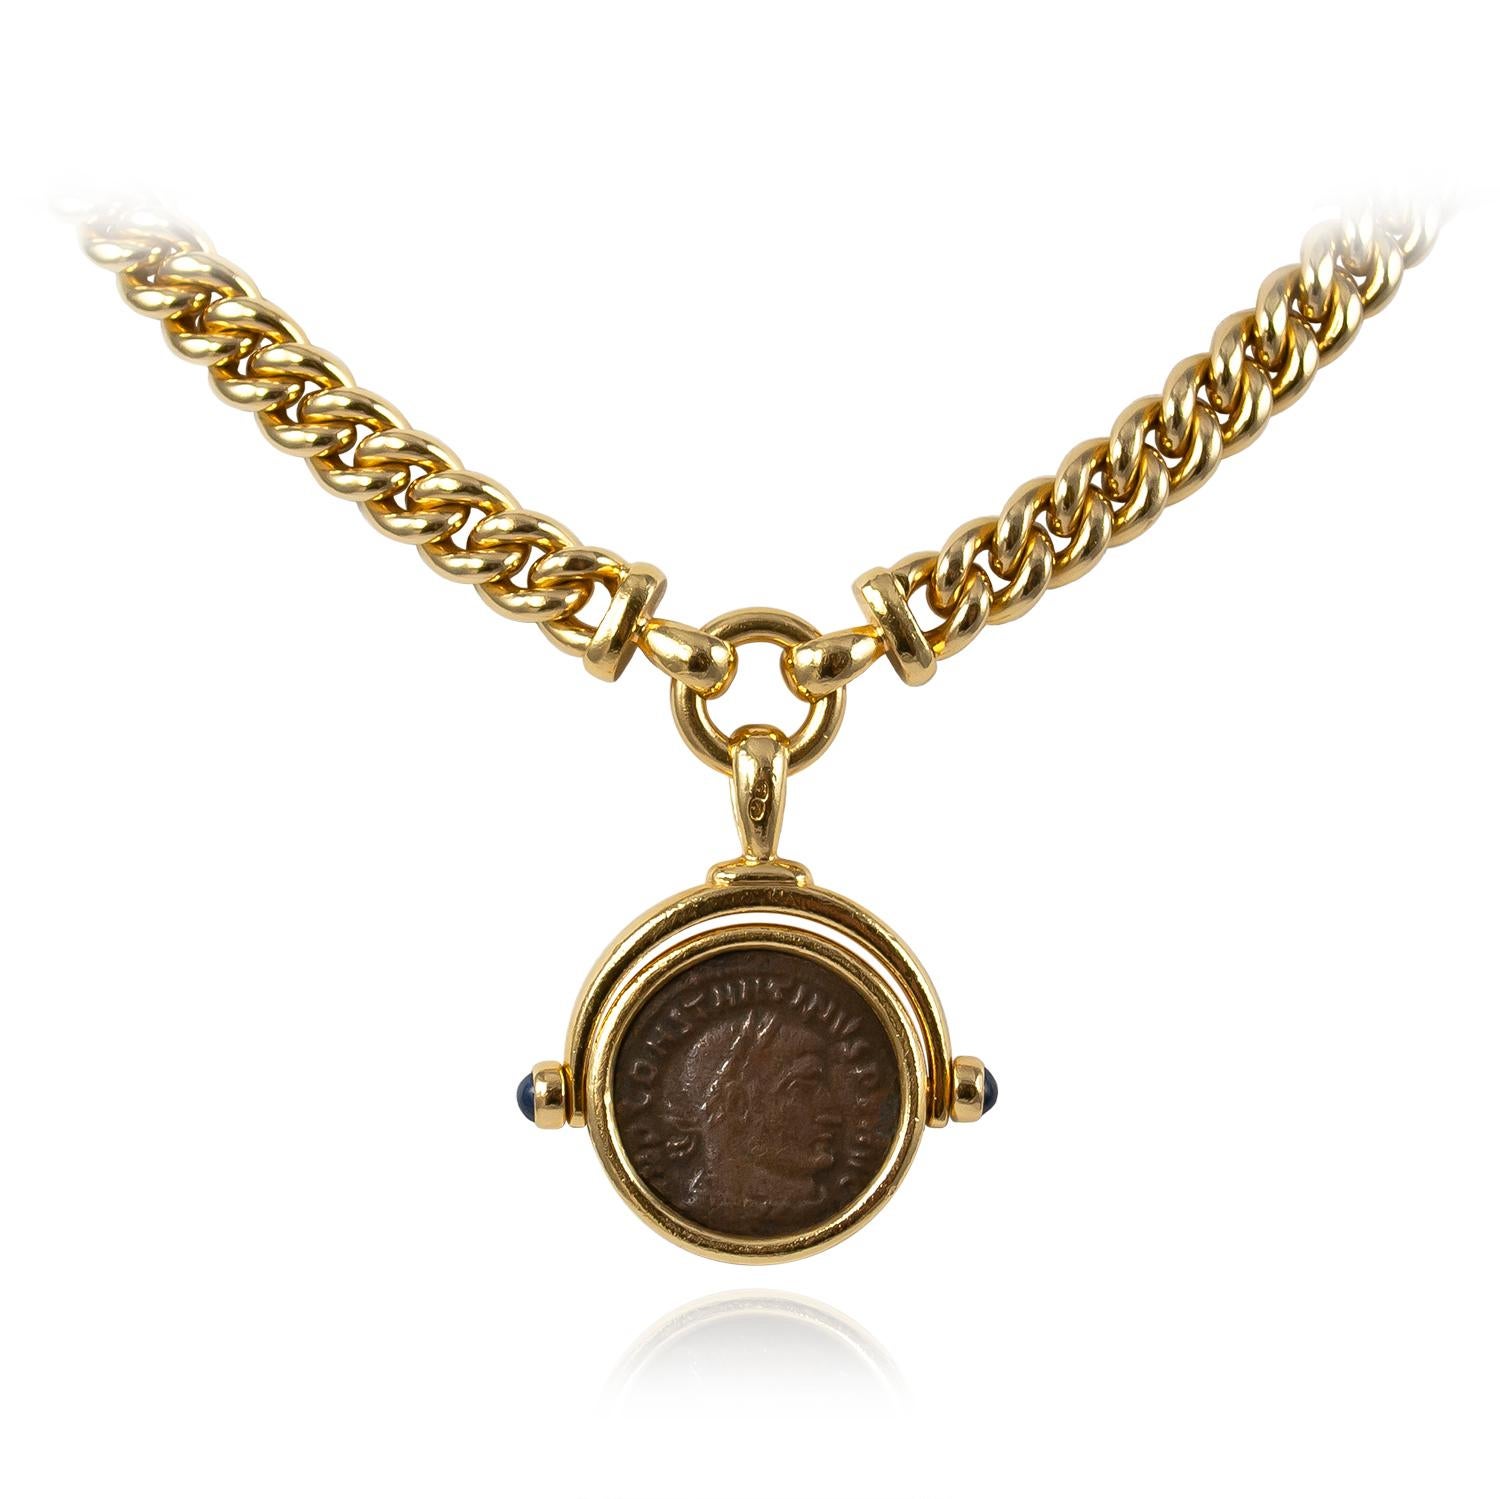 This vintage necklace carries on the Bulgari coin tradition in 18K Yellow Gold; adorned with sapphire cabochons and an Italian coin center of Constantine Magno (307 - 337 BC). 

HISTORY OF THE BULGARI COIN THEME: 
In the 1960s, Bulgari developed a